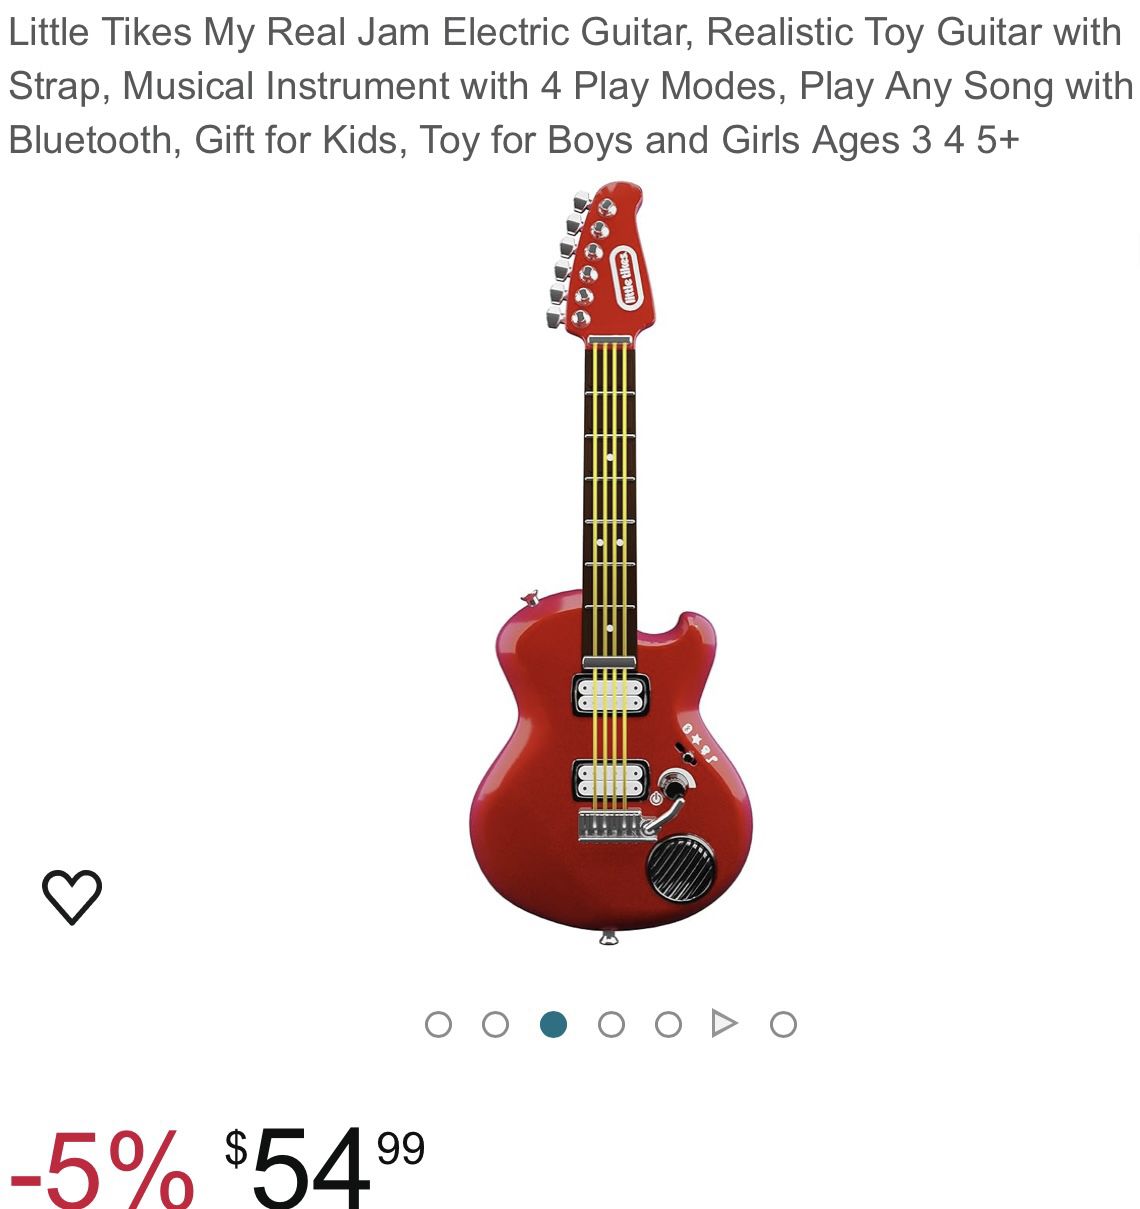 My Real Jam Electric Guitar Toy For Kids